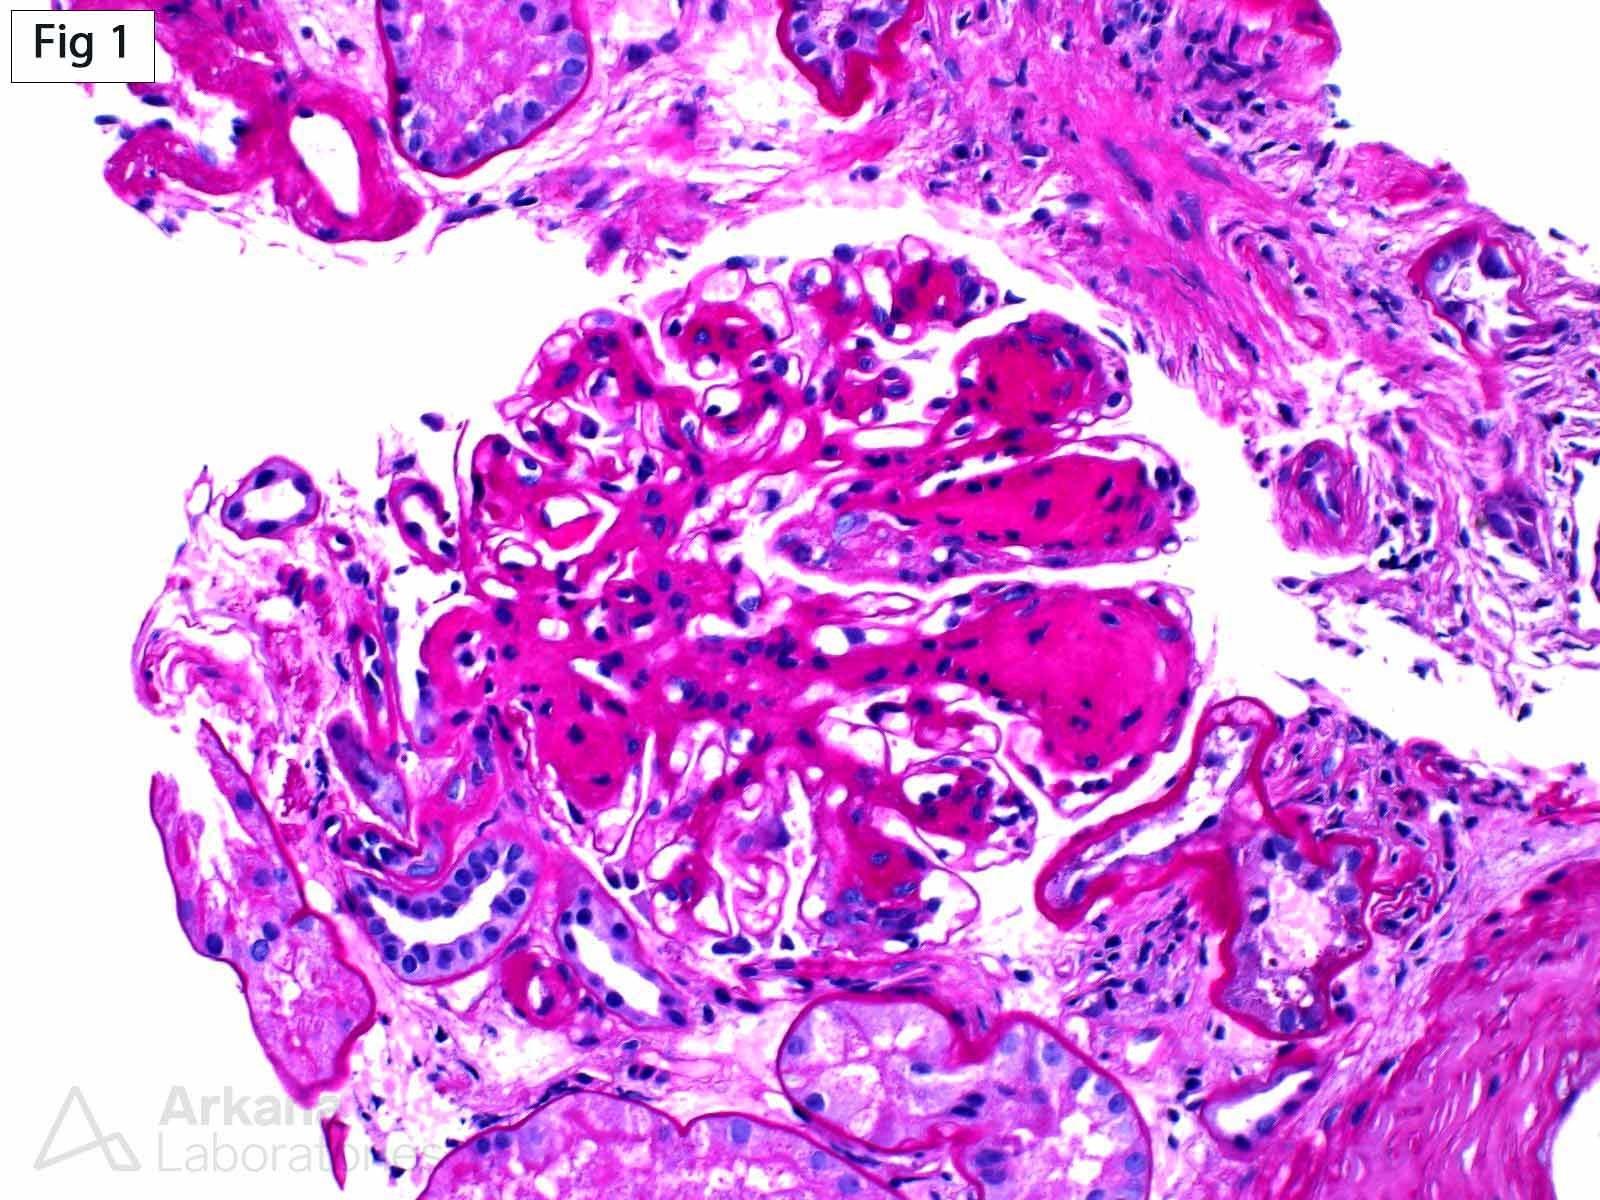 severe mesangial matrix expansion with frequent large nodule formation, Diabetic Glomerulosclerosis